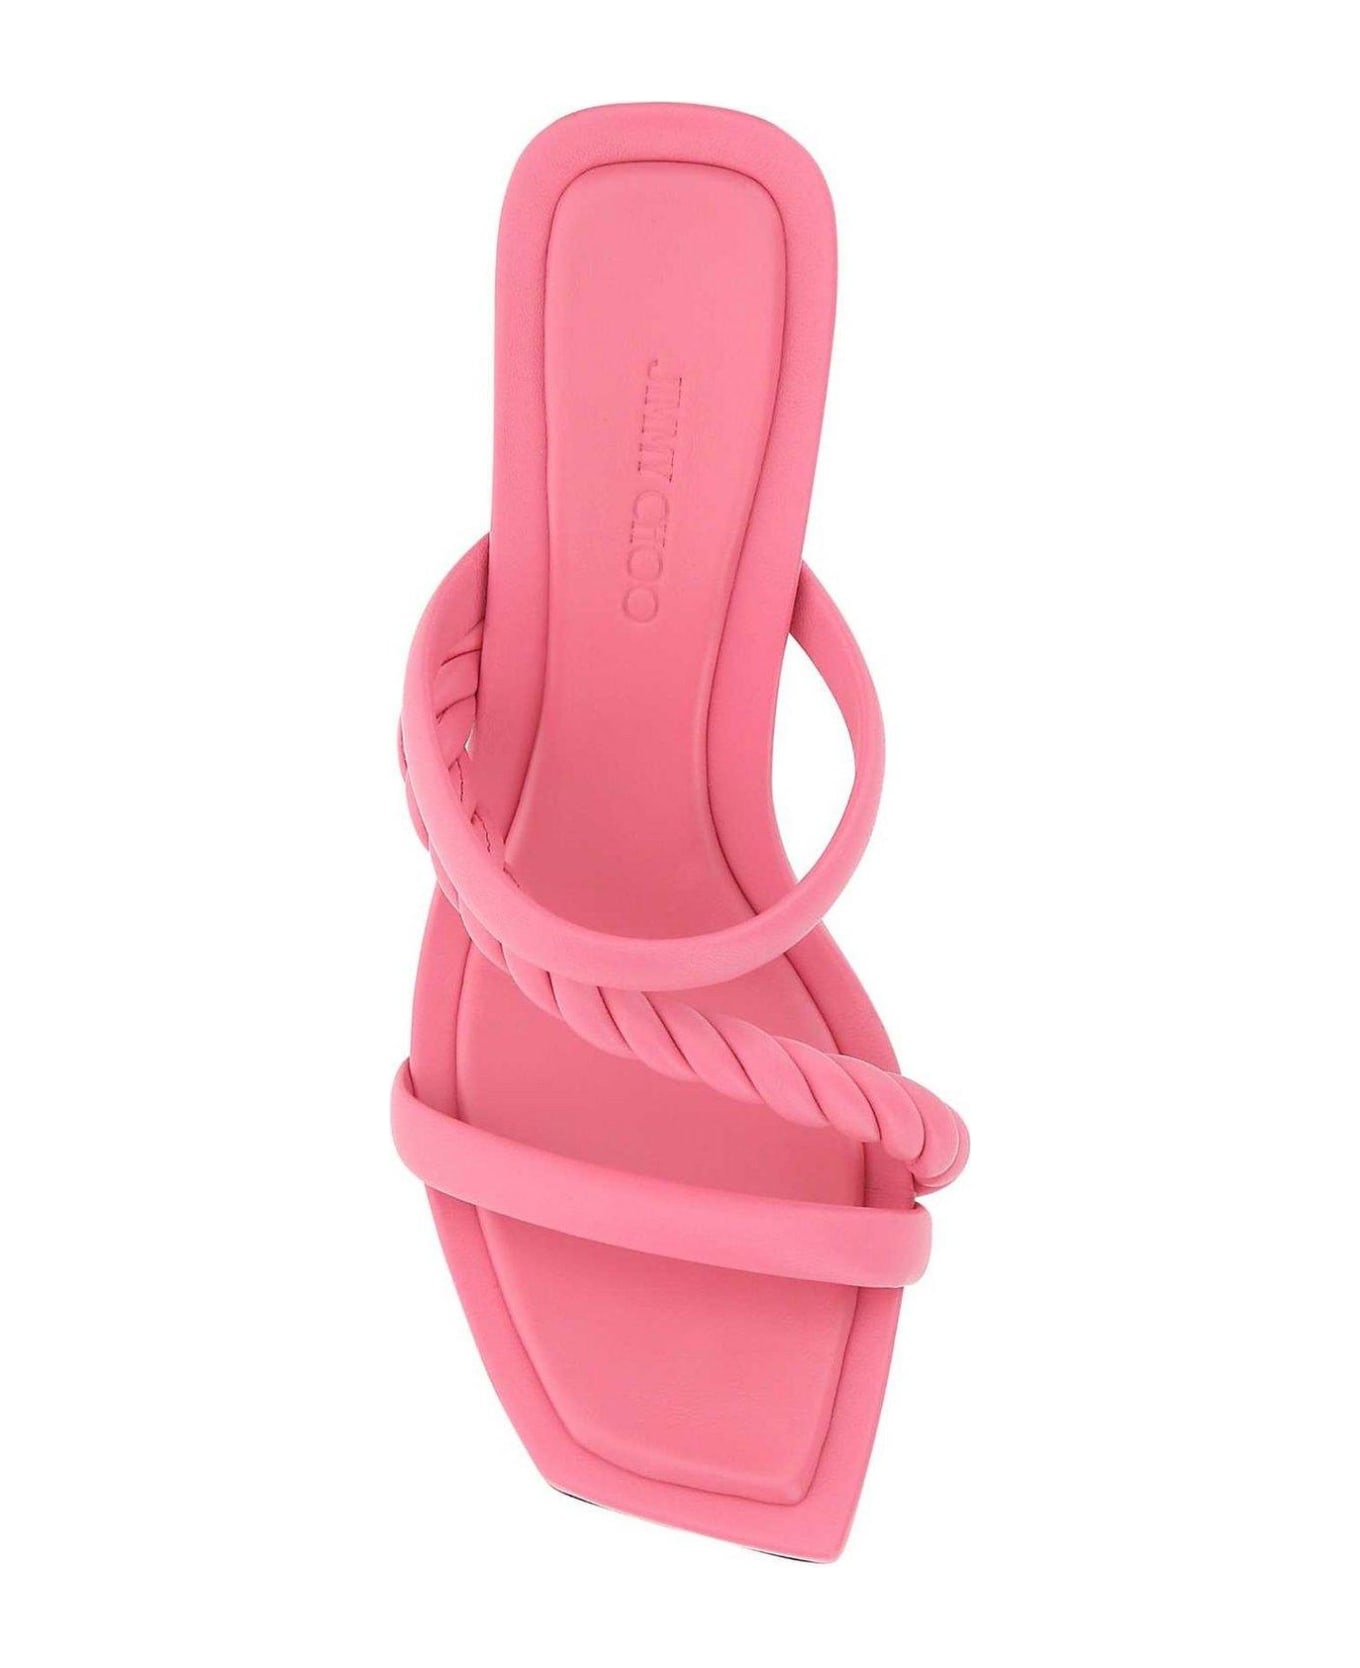 Jimmy Choo Diosa 90 Sandals - Candy Pink